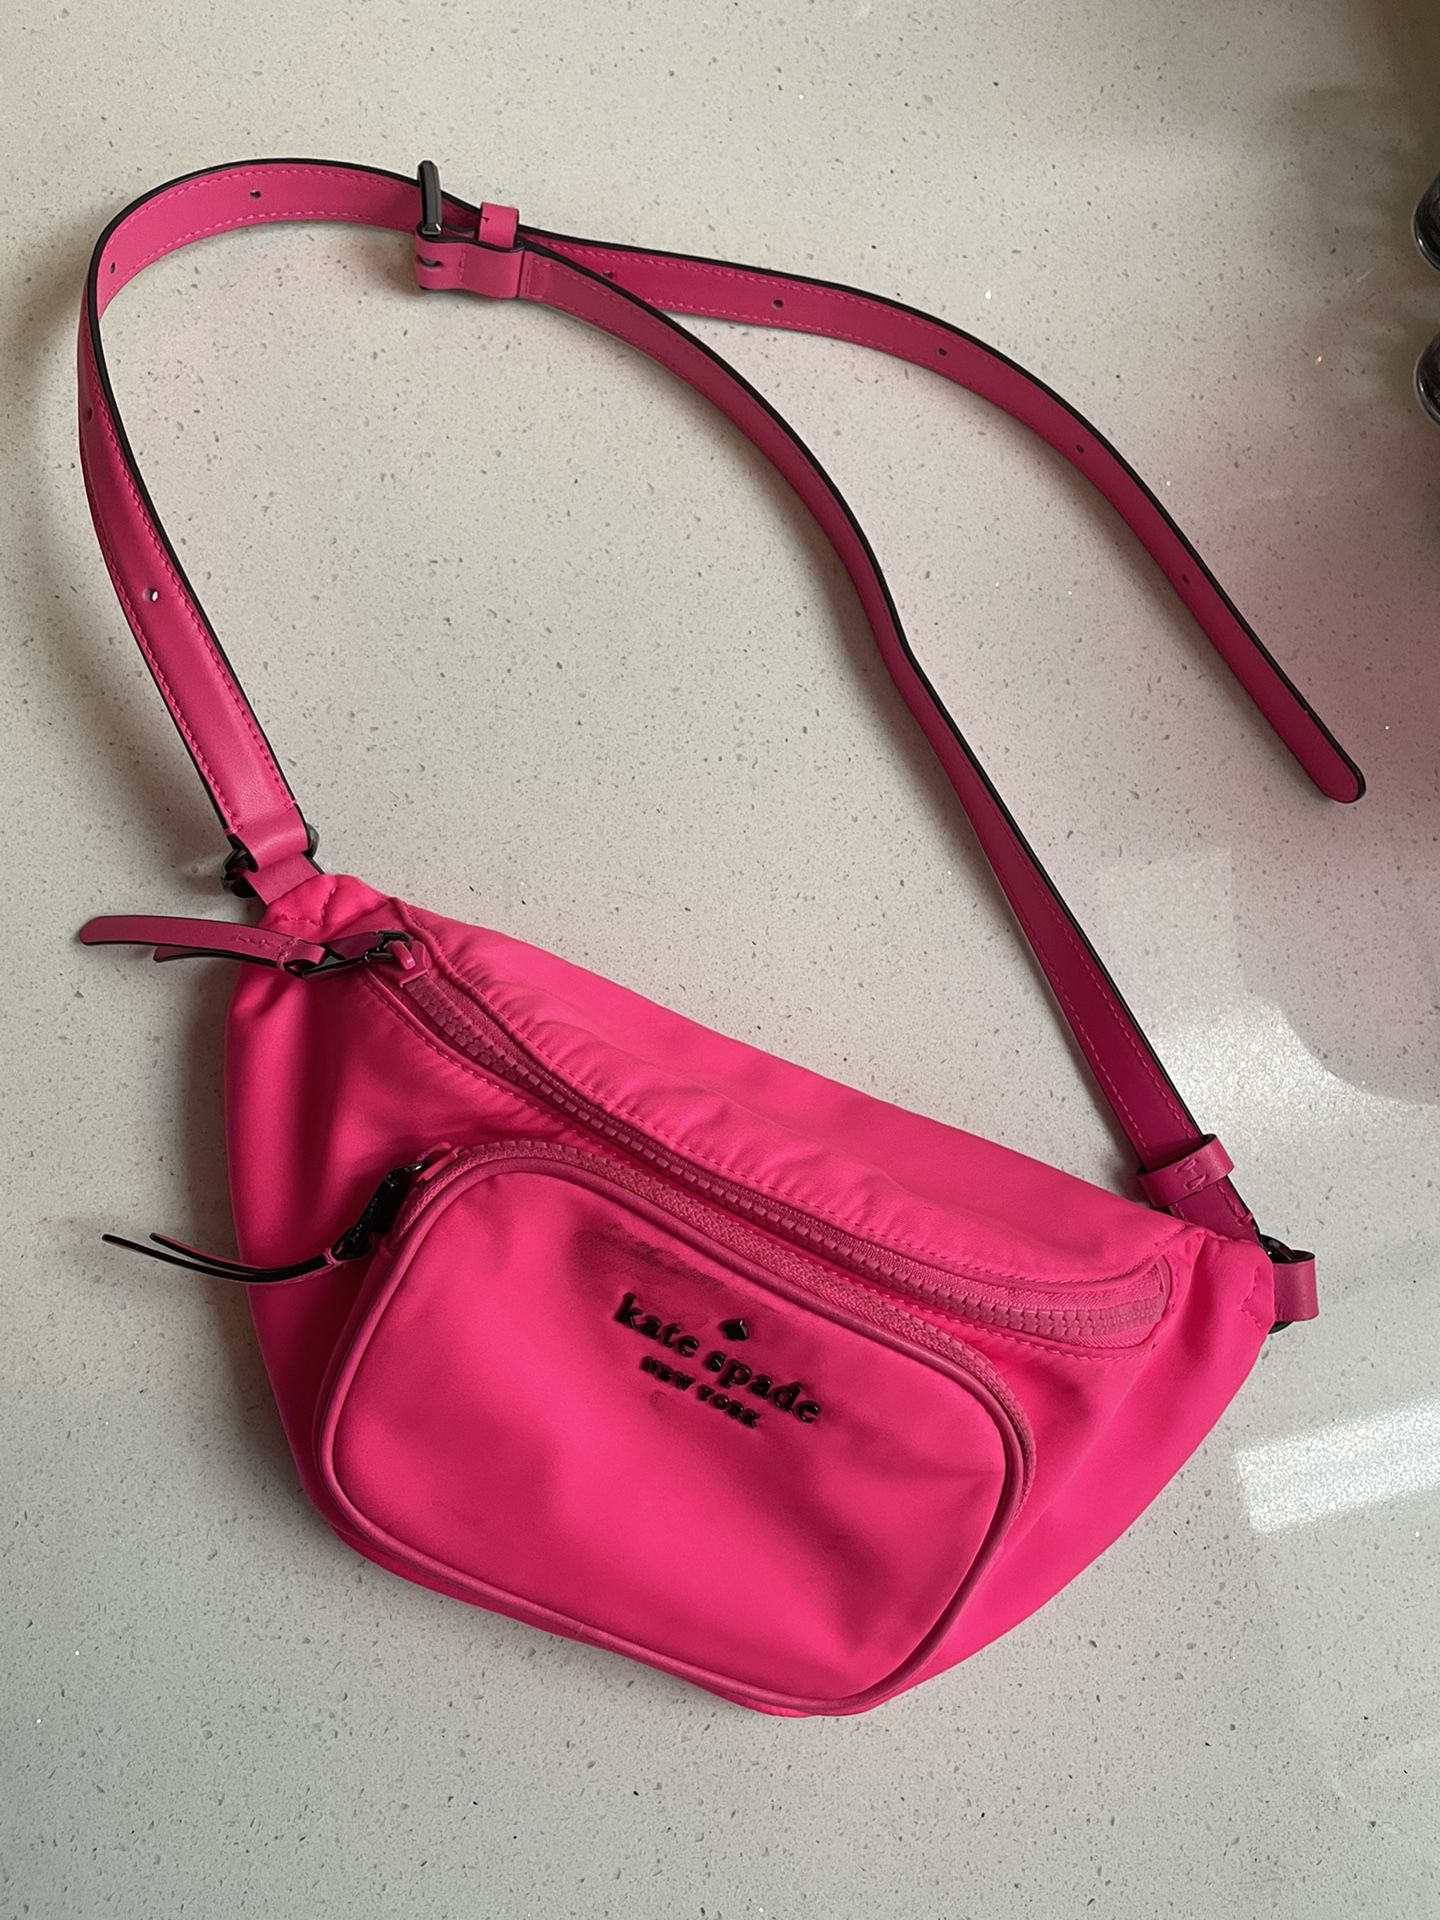 Kate Spade Fanny Pack for Sale in San Diego, CA - OfferUp